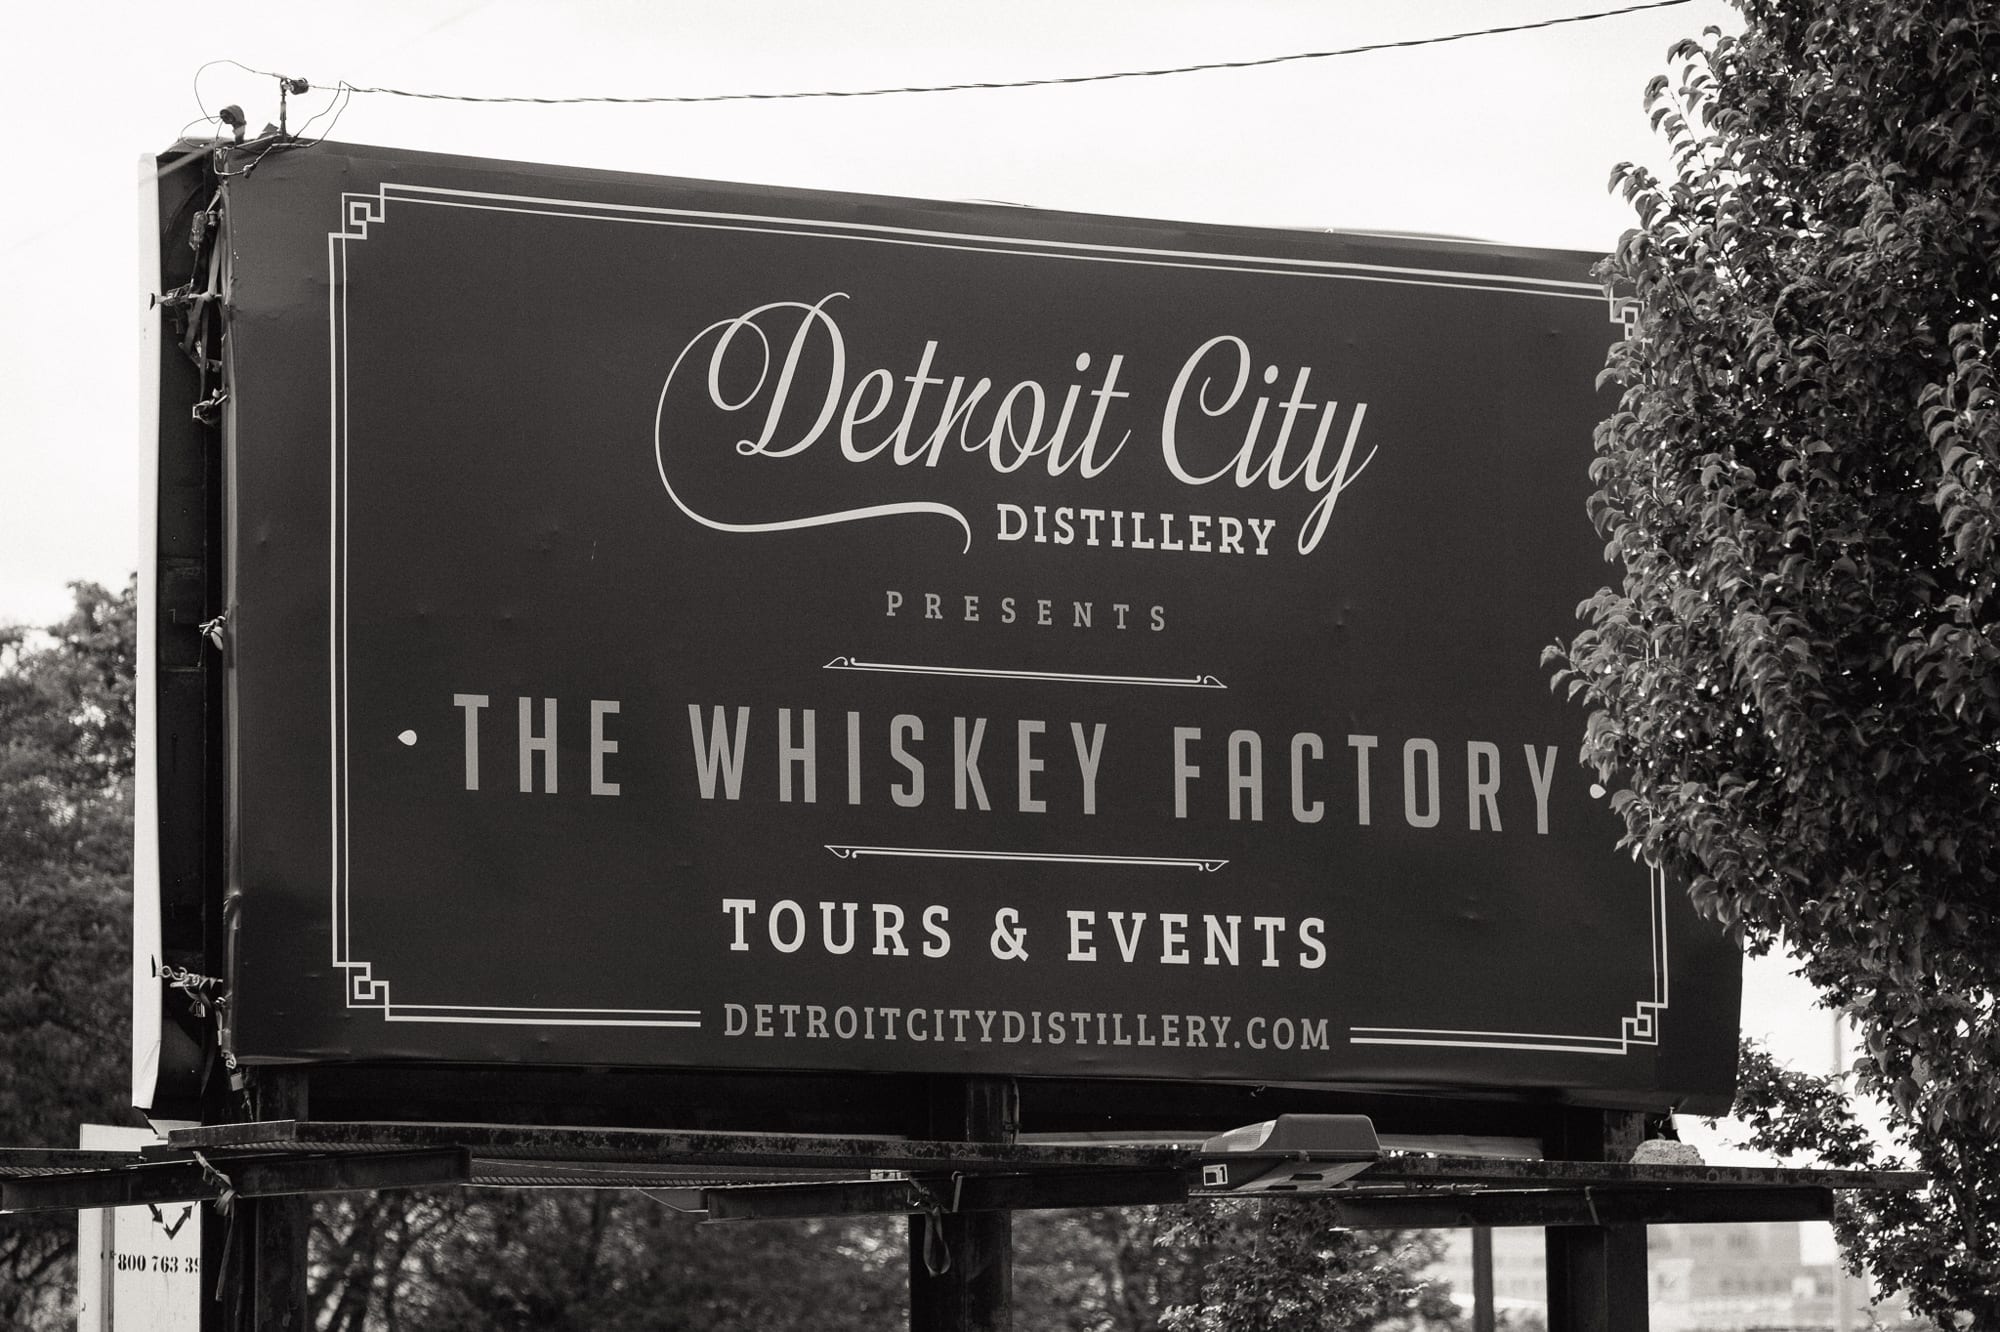 The Whiskey Factory sign